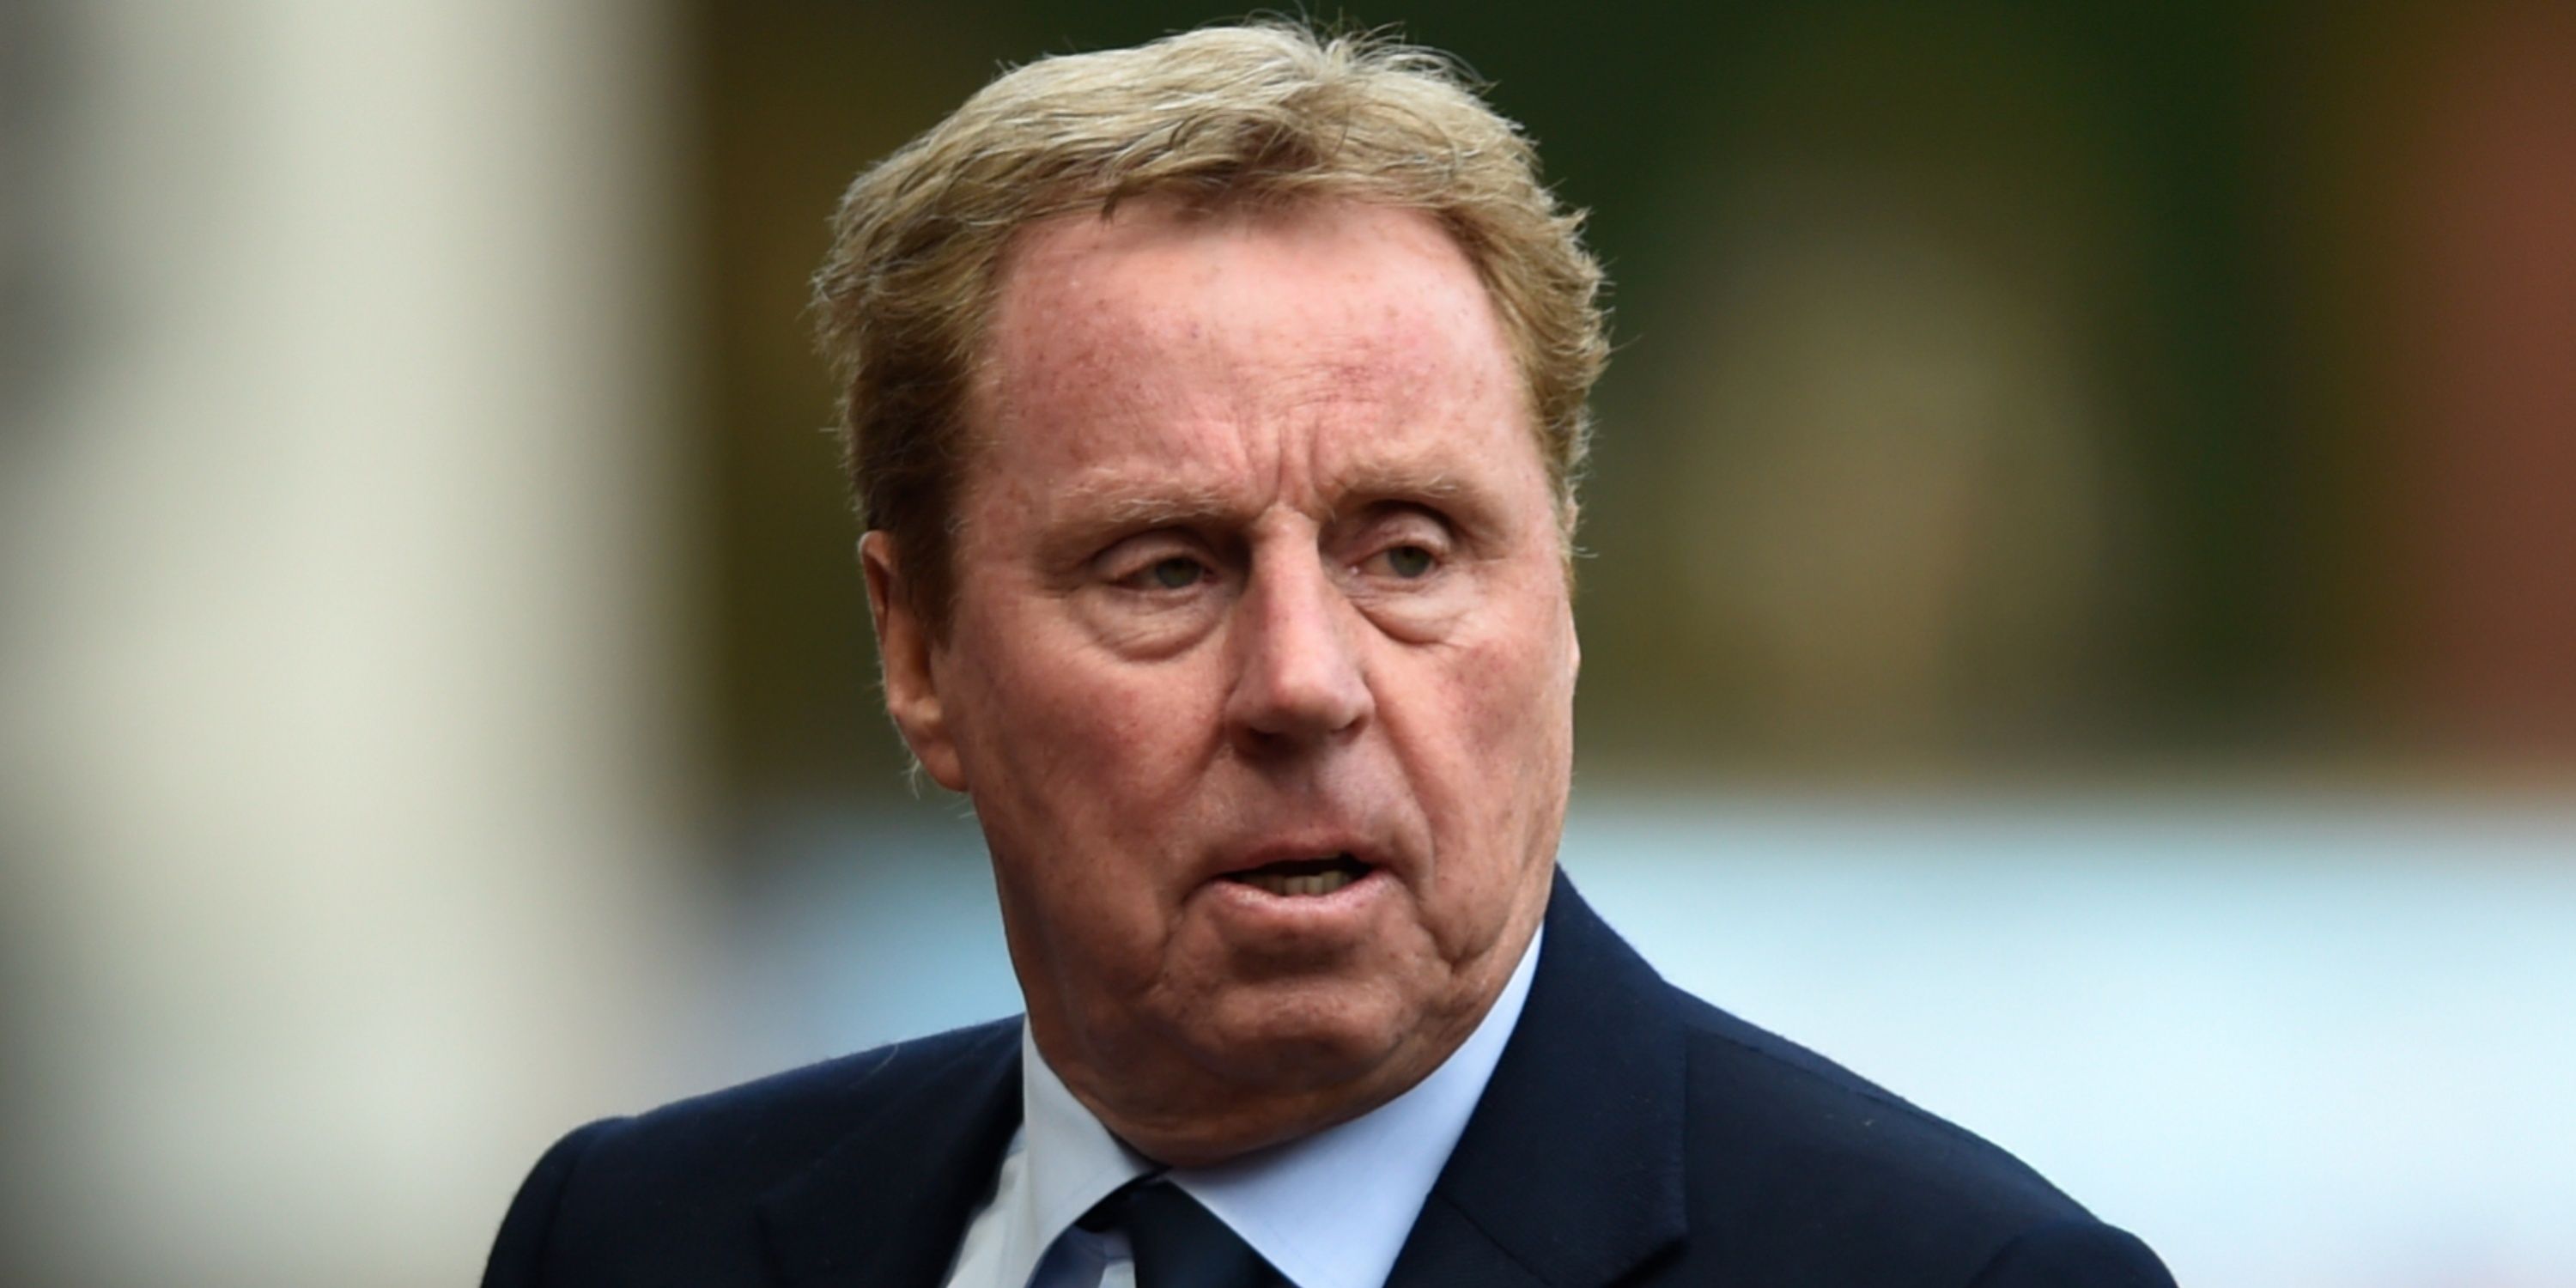 Harry Redknapp in a suit